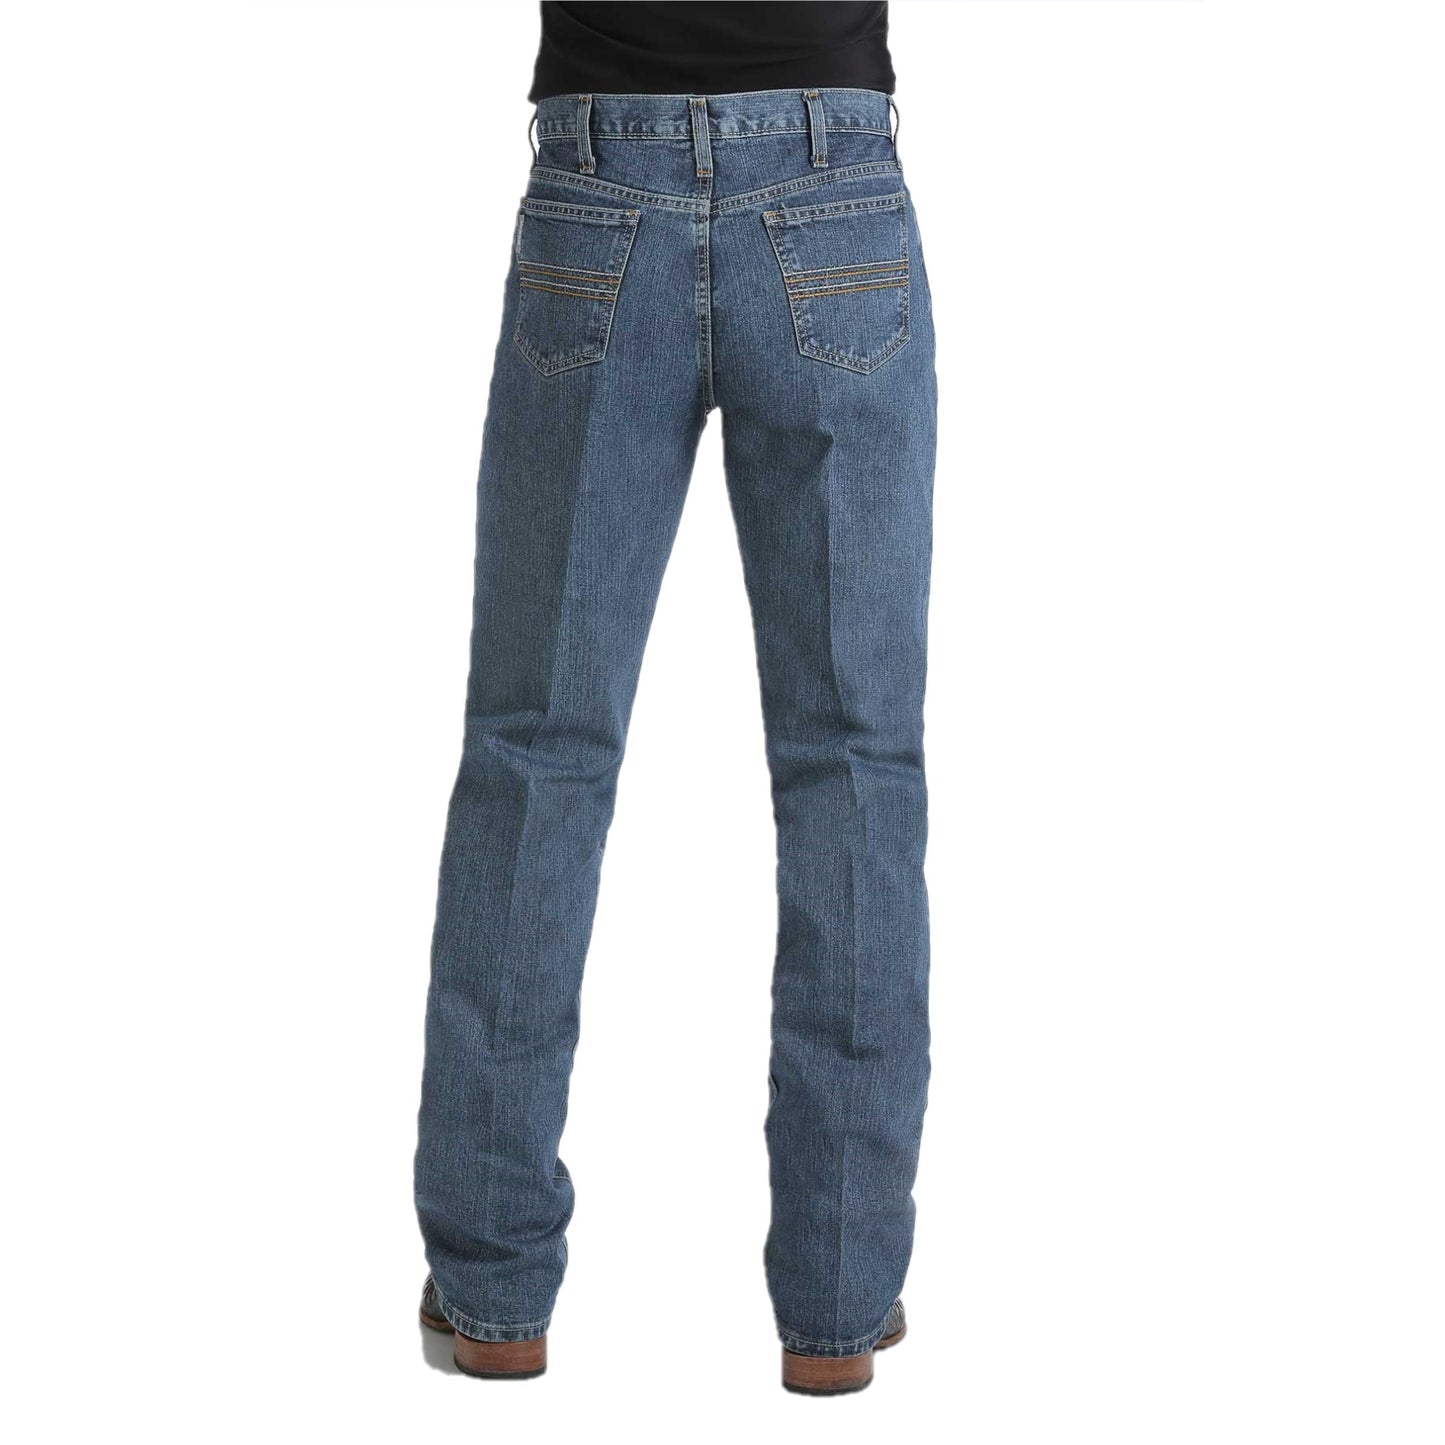 Denim Pants for Women Pants With Pockets Jean Pants 813# Cowgirl